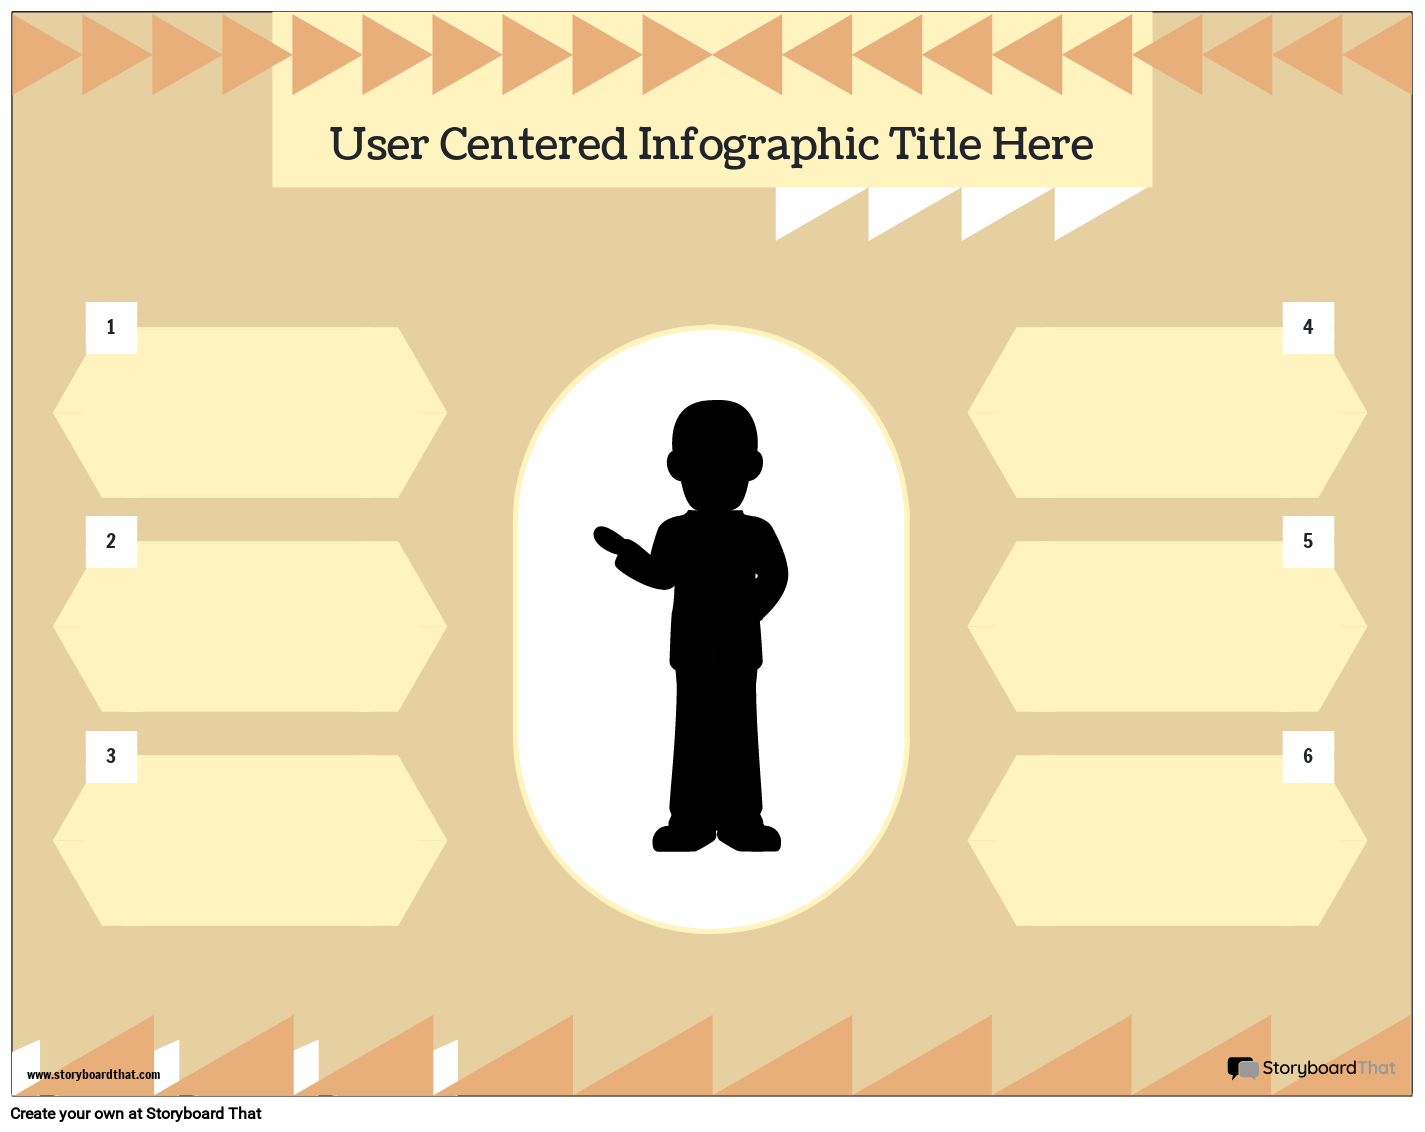 Corporate User Centered Infographic Template 1